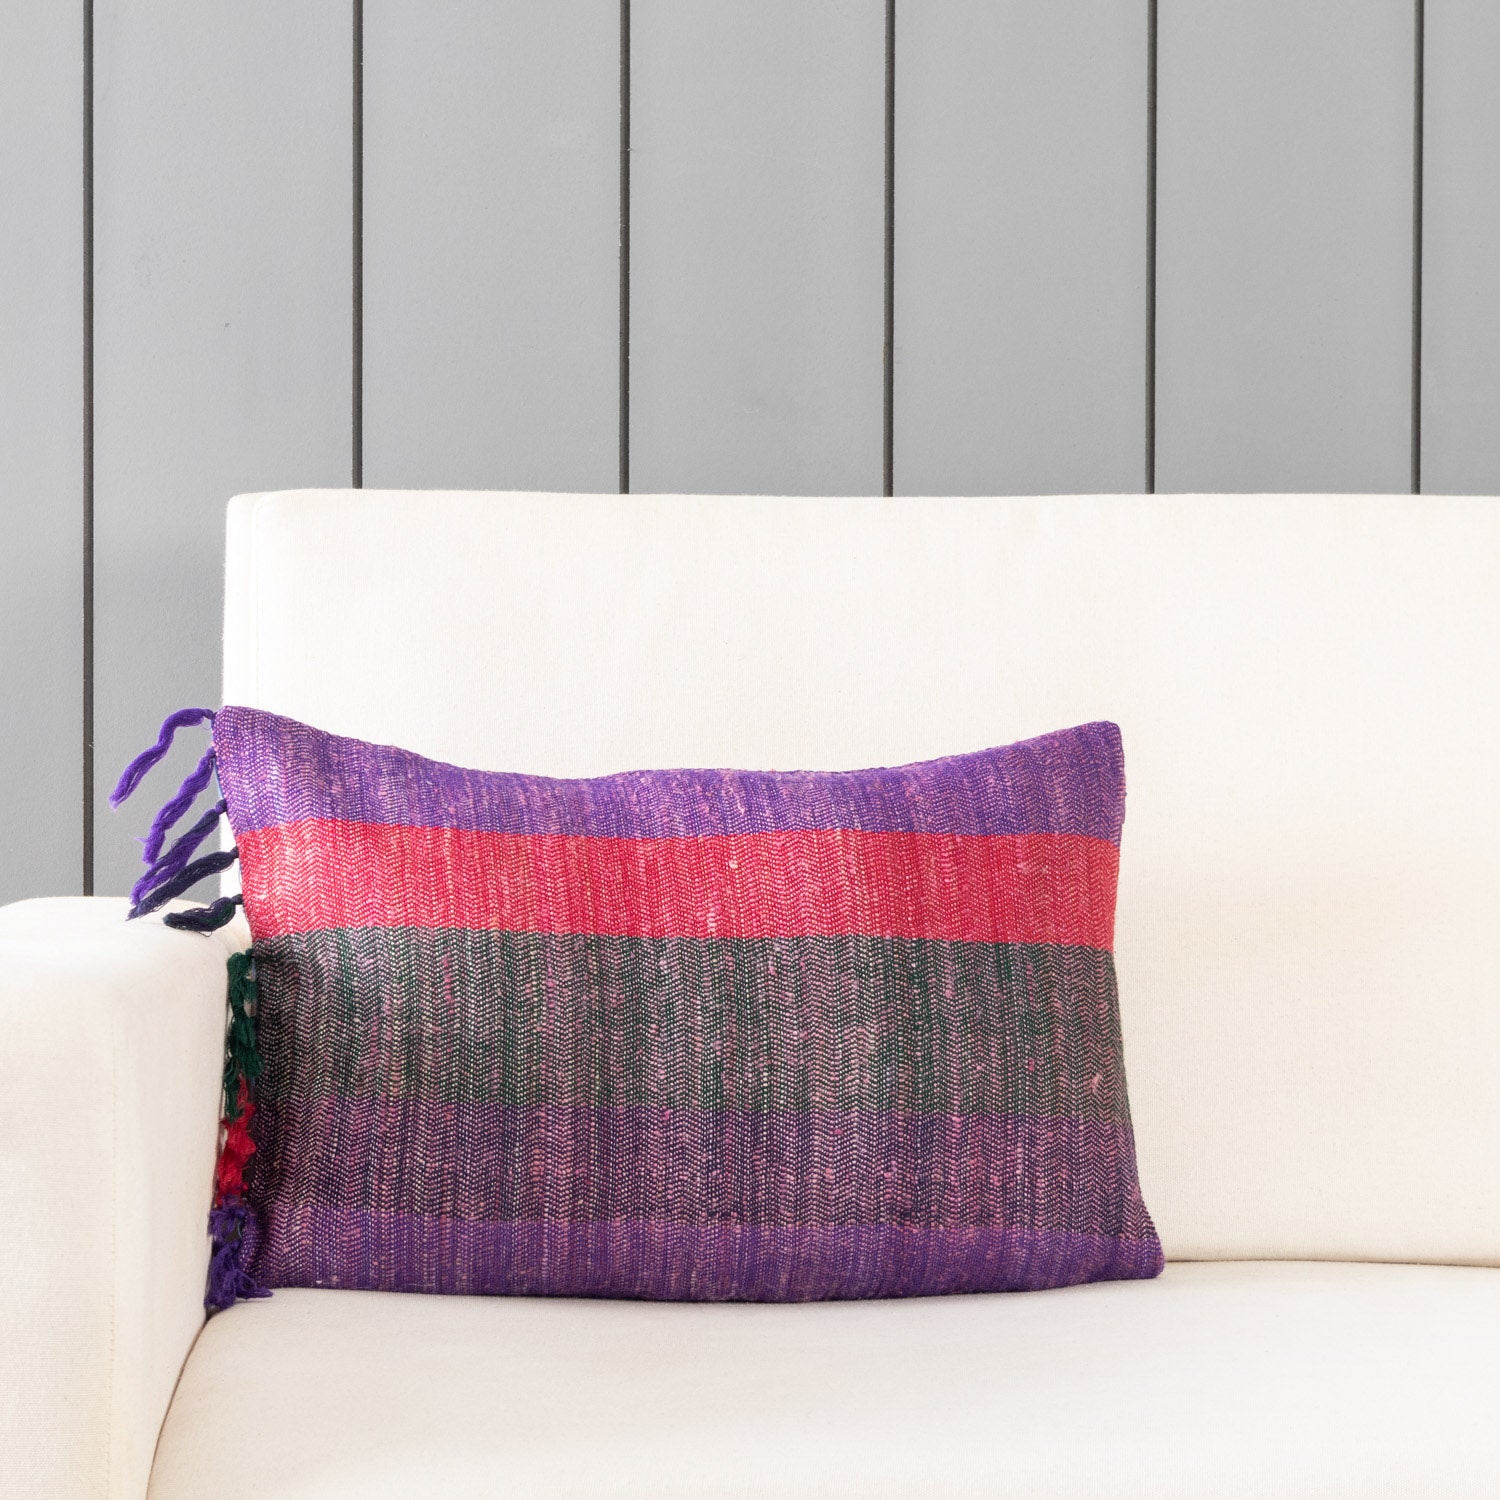 Handwoven Upcycled Multi-colored Wool & Oak Silk Cushion Cover - 12x18